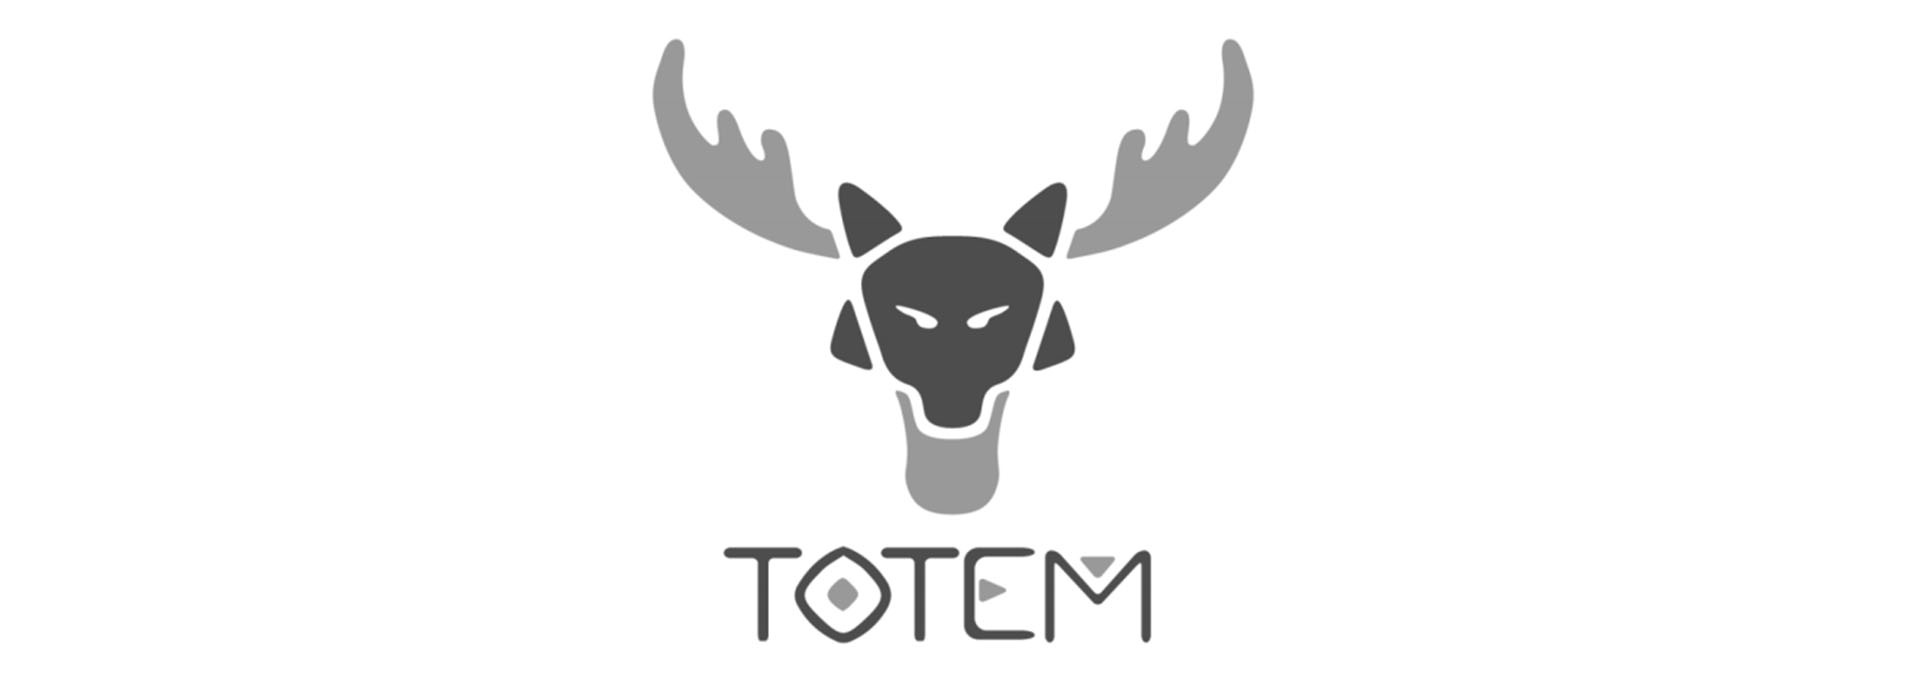 Project Totem